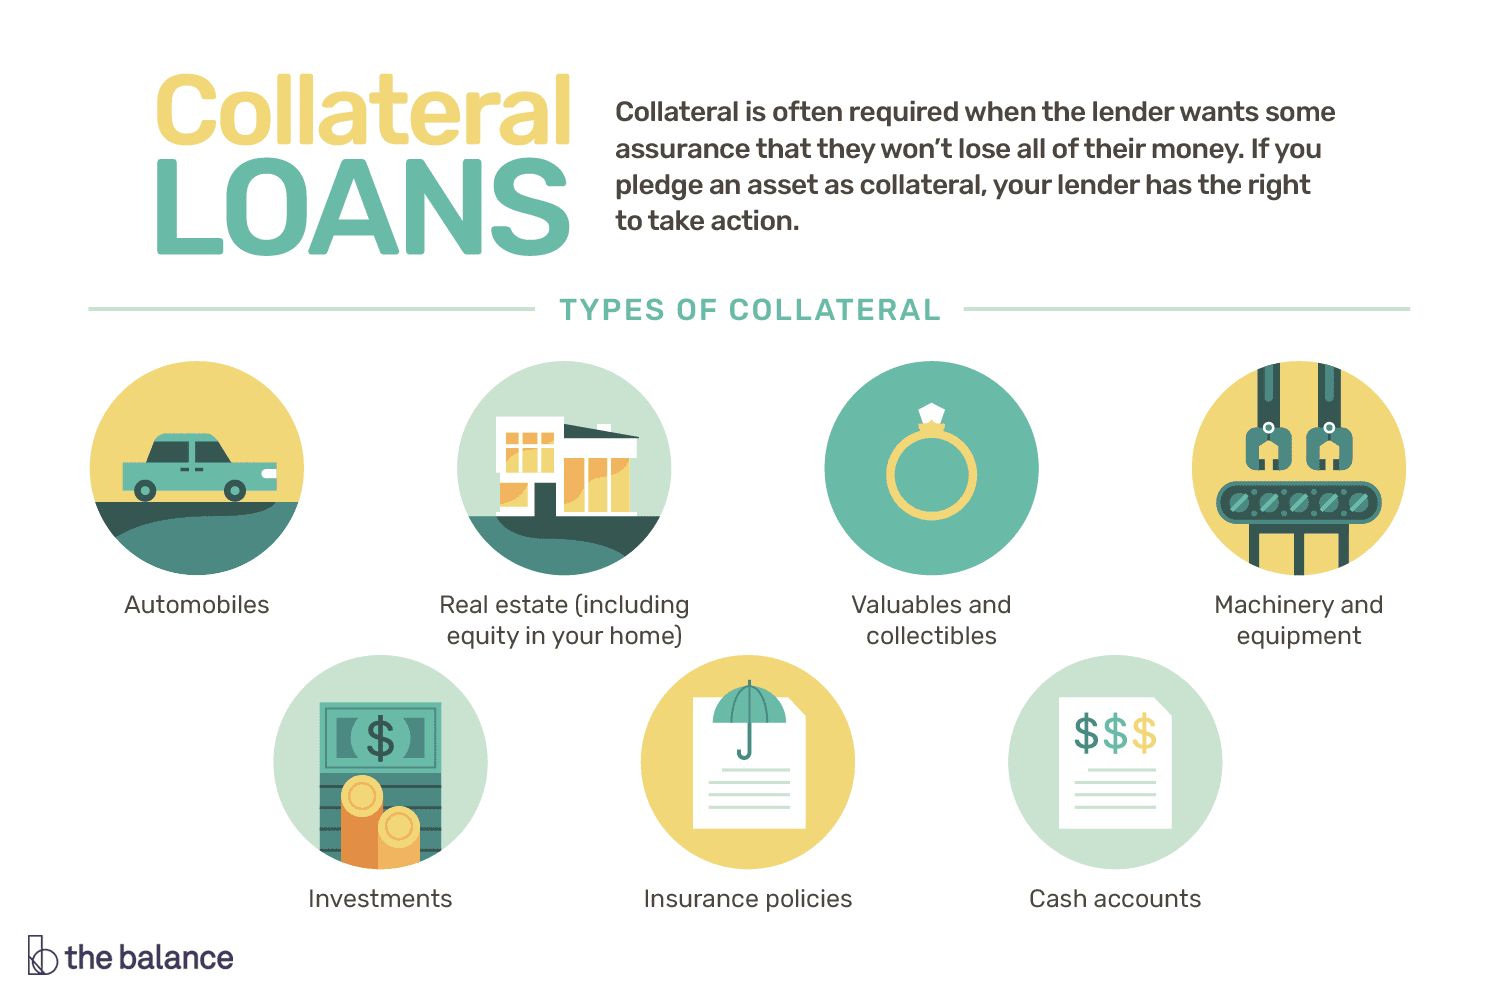 Using Collateral Loans to Borrow Against Your Assets